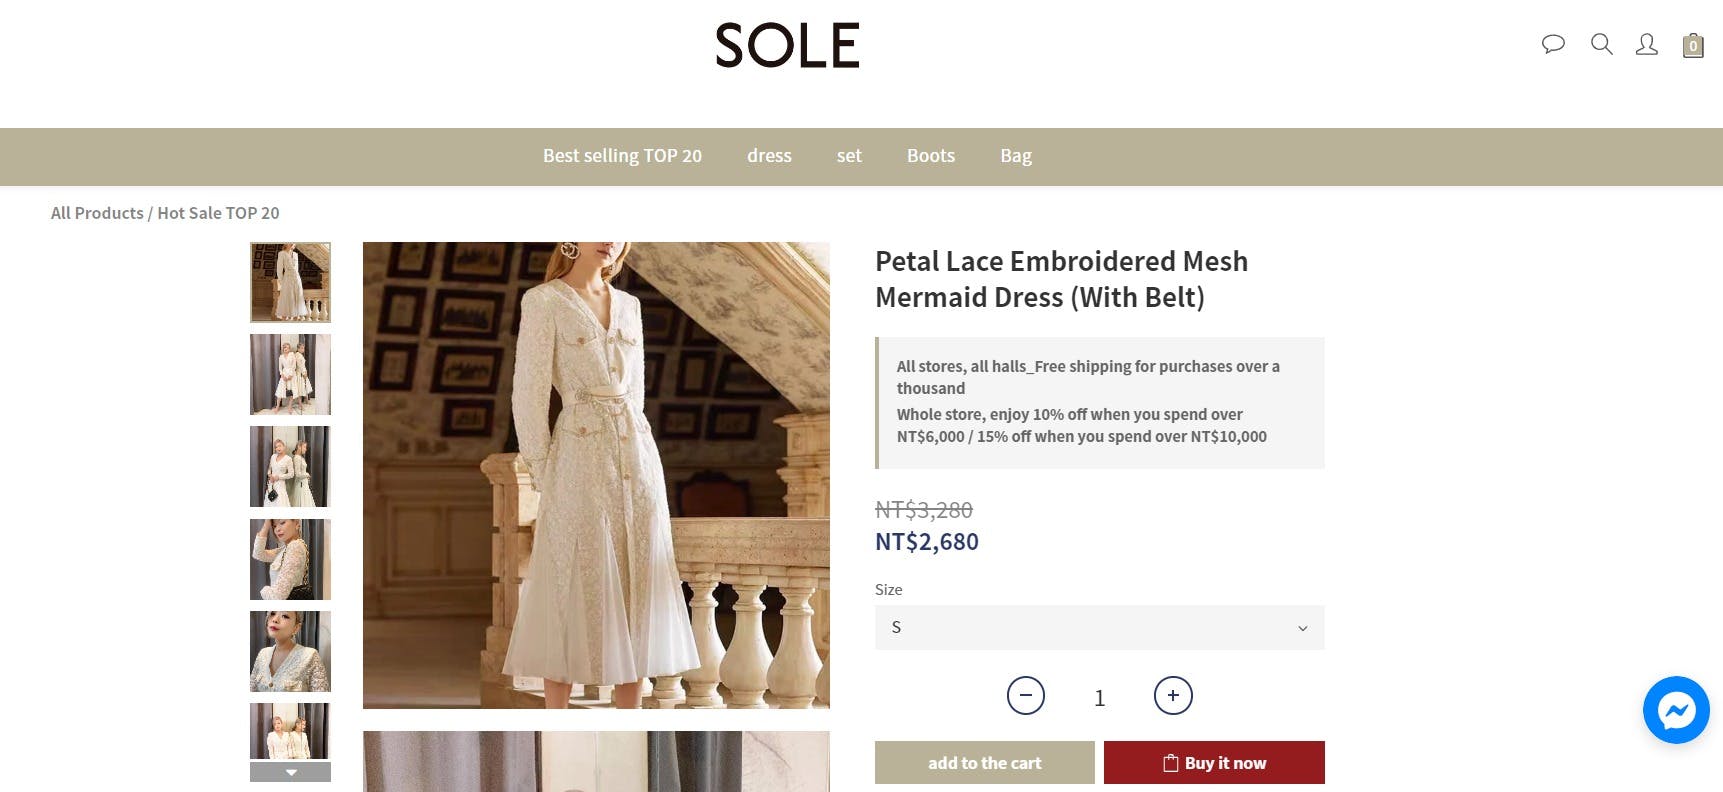 SOLE product page